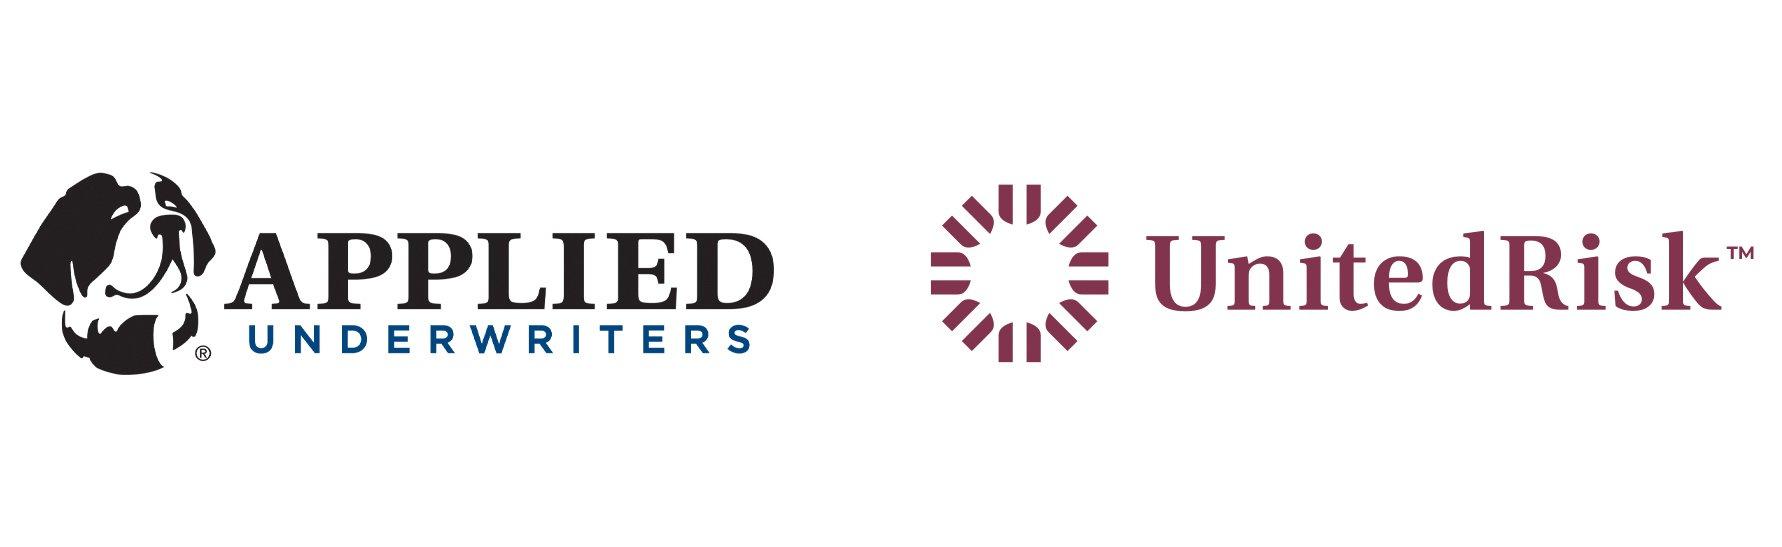 Applied Underwriters and United Risk Logo